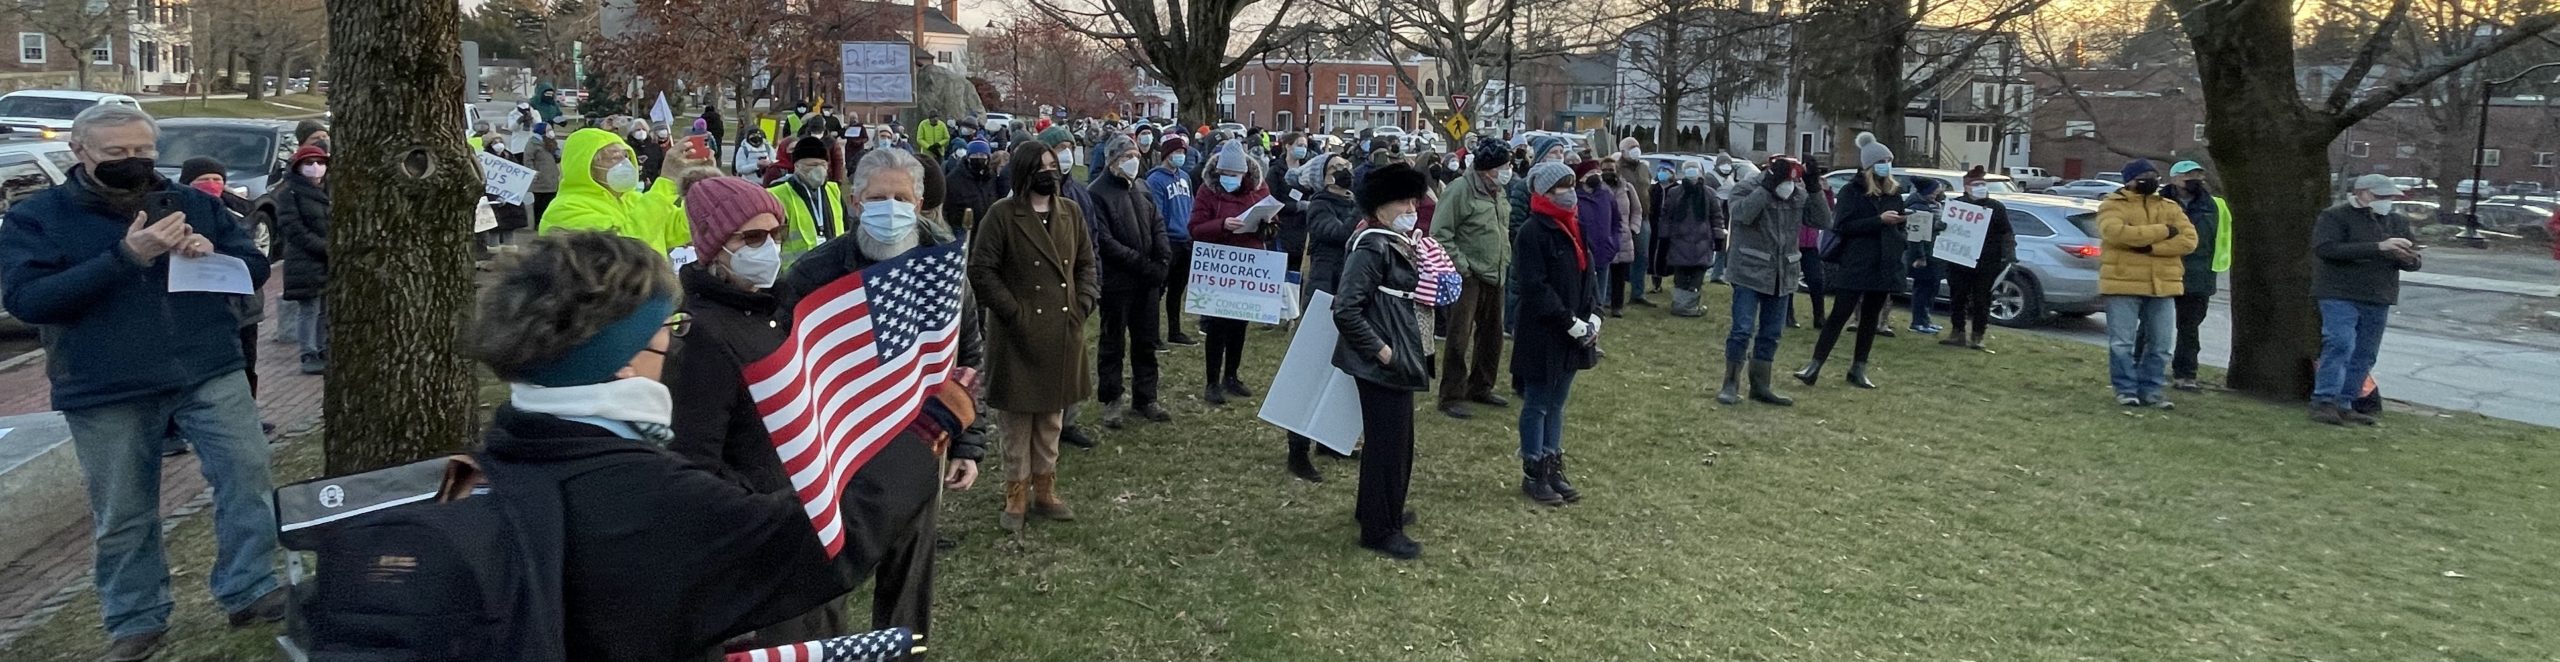 January 6 rally in Concord drew a crowd for democracy.